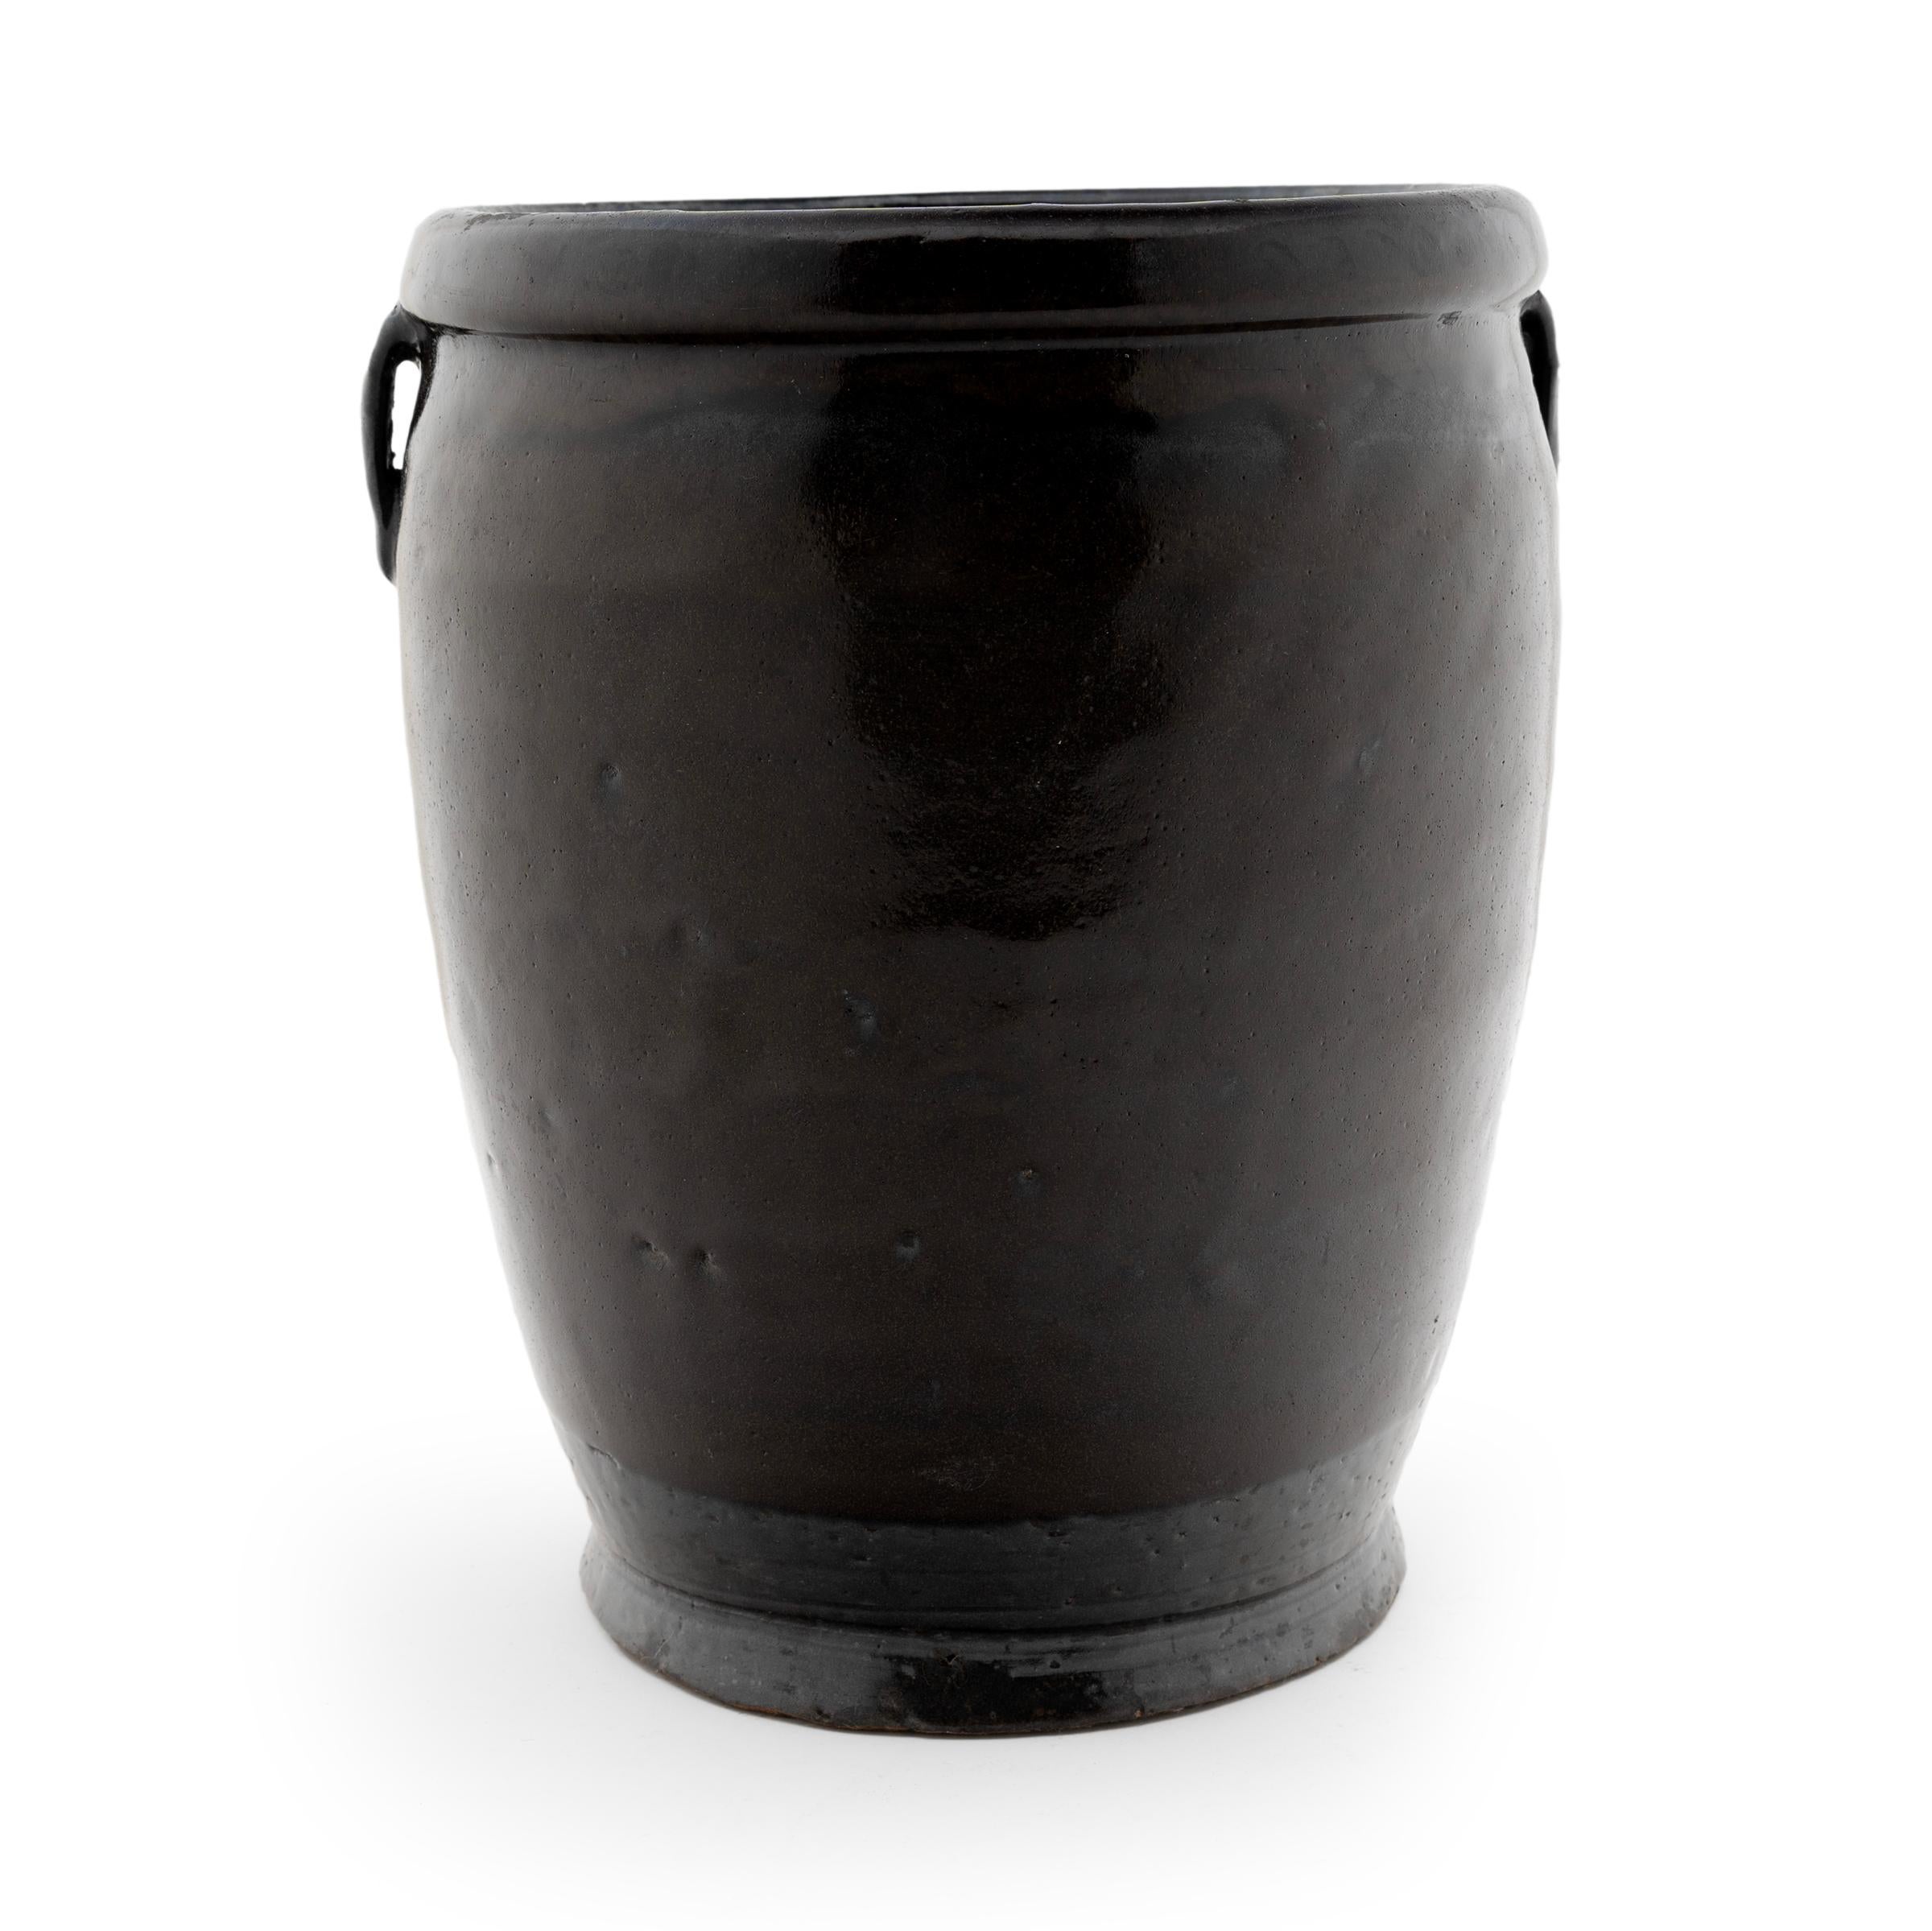 A rich, dark brown glaze coats the gently tapered form of this late 19th-century kitchen jar. As evidenced by the glazed interior, the jar was once used daily in a Qing-dynasty kitchen for fermenting foods and condiments. The wide-mouth jar stands